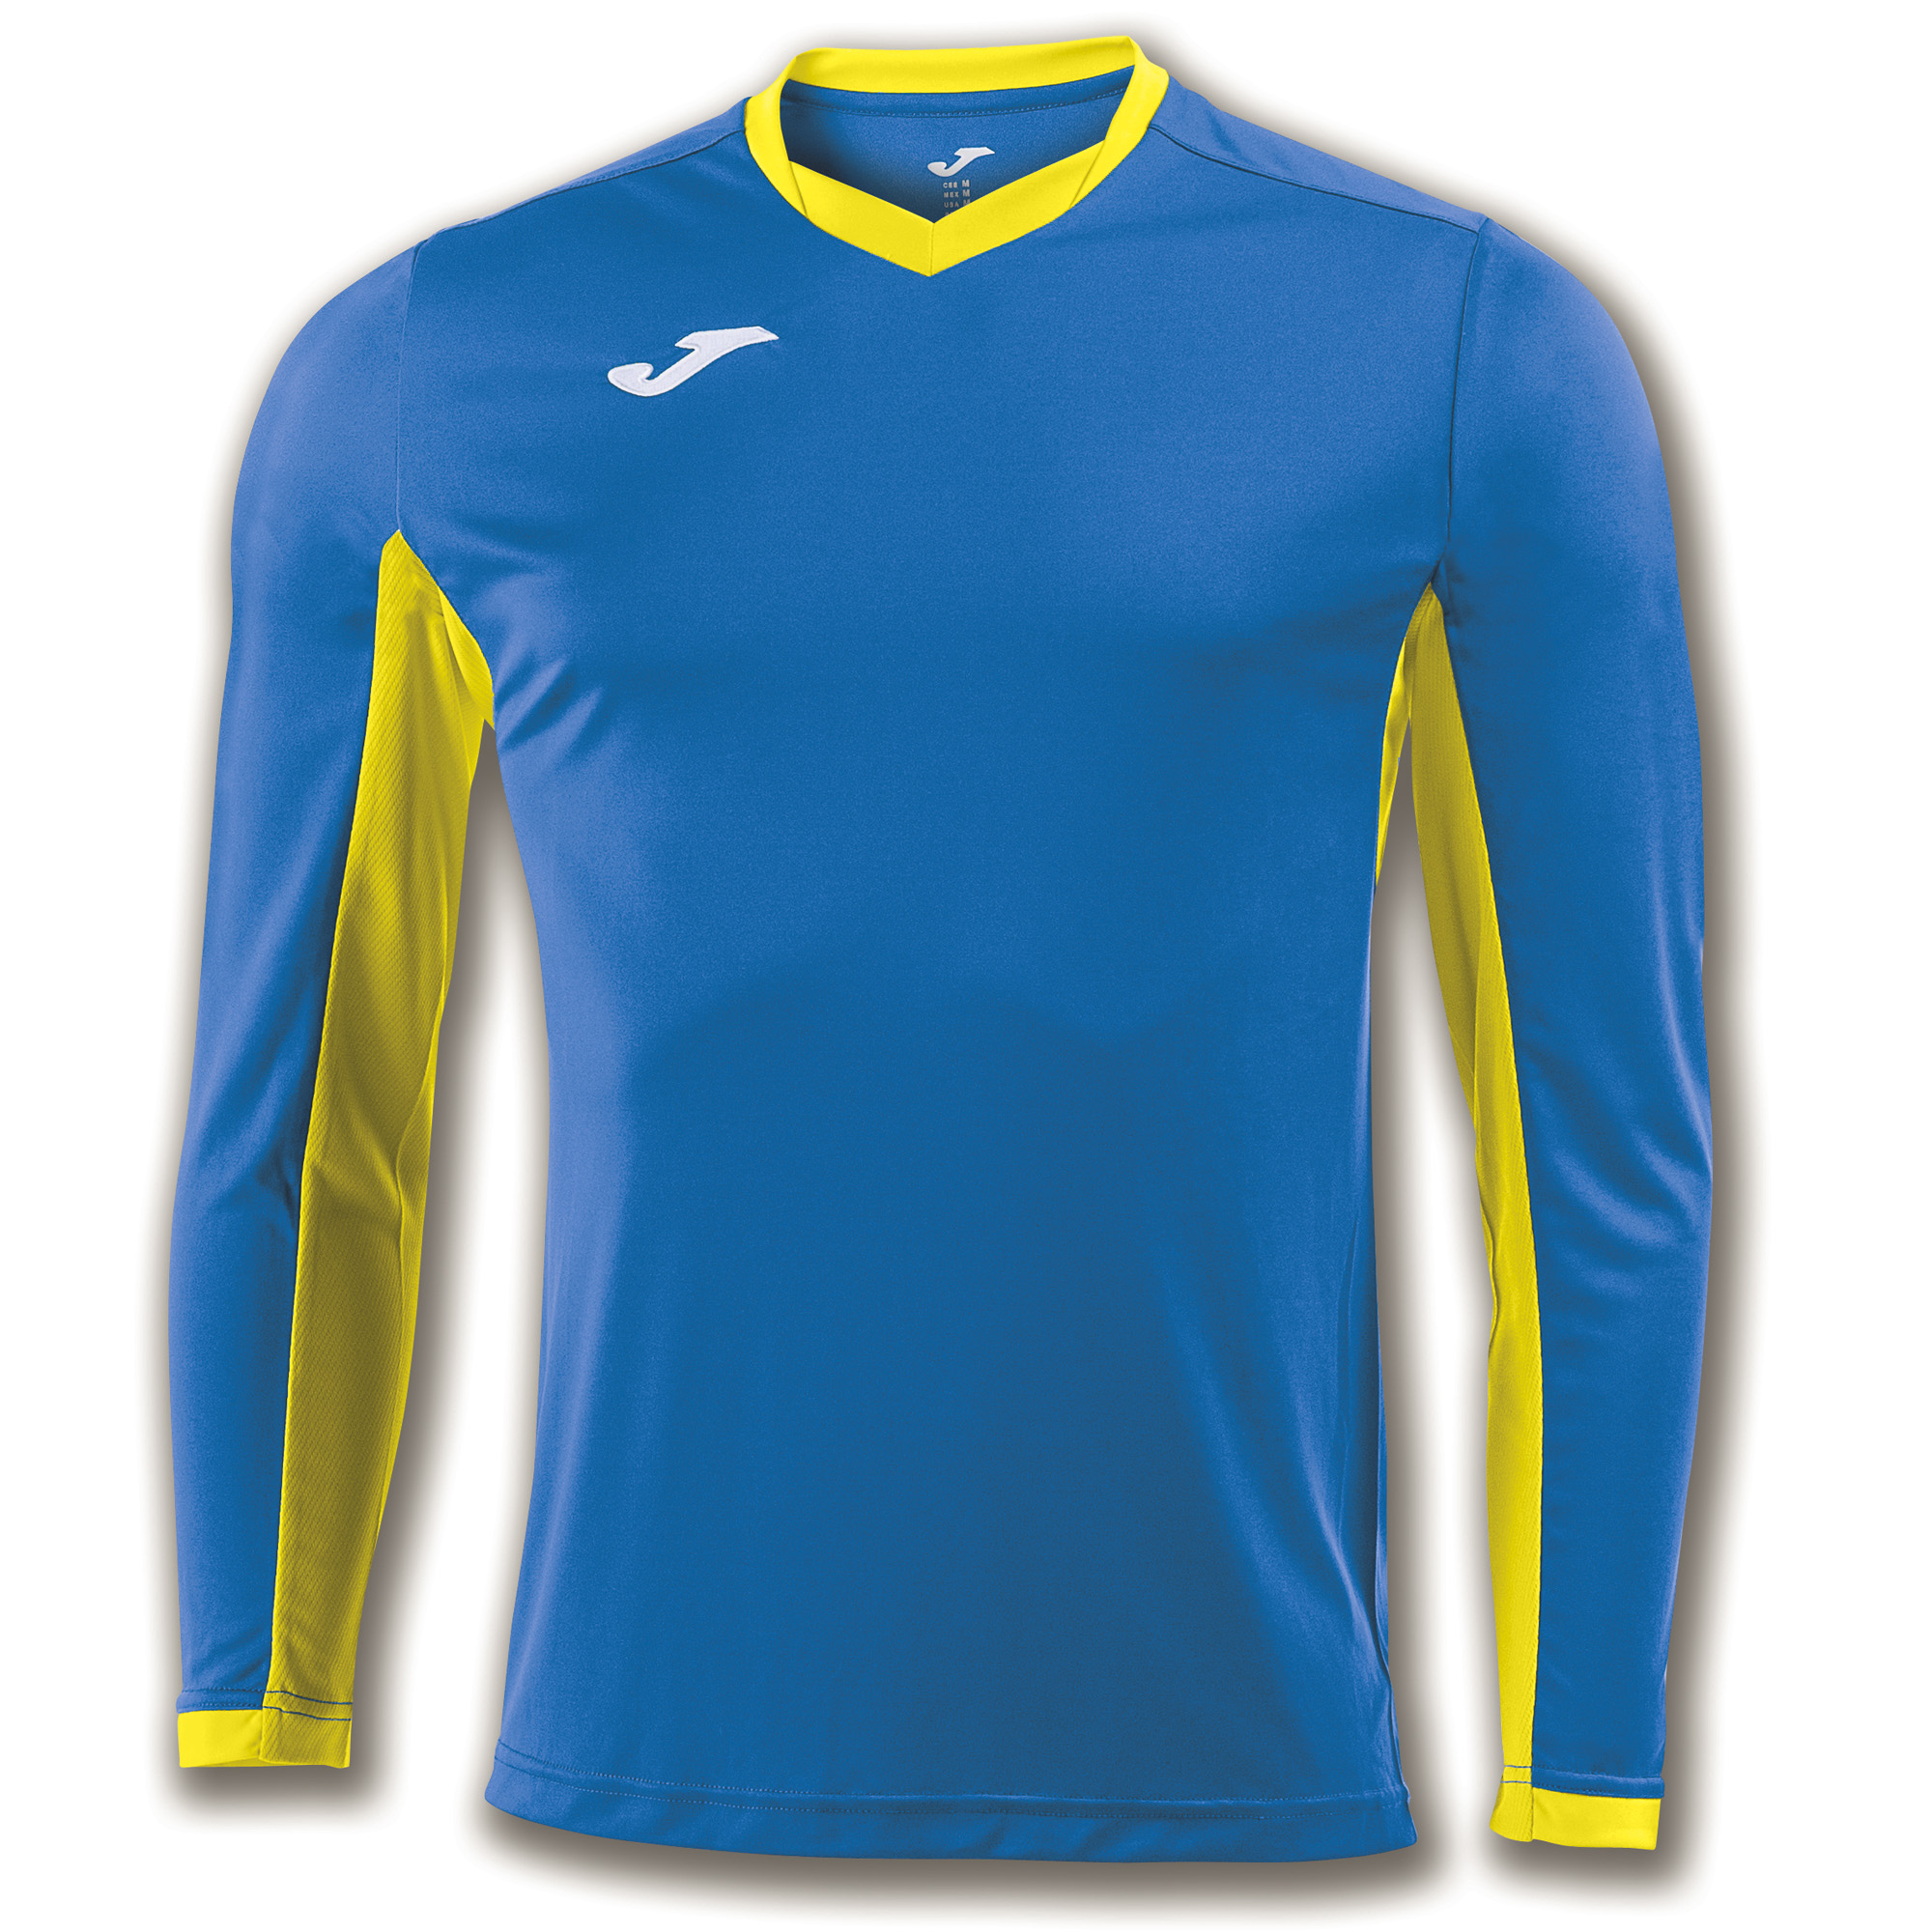 yellow and blue jersey